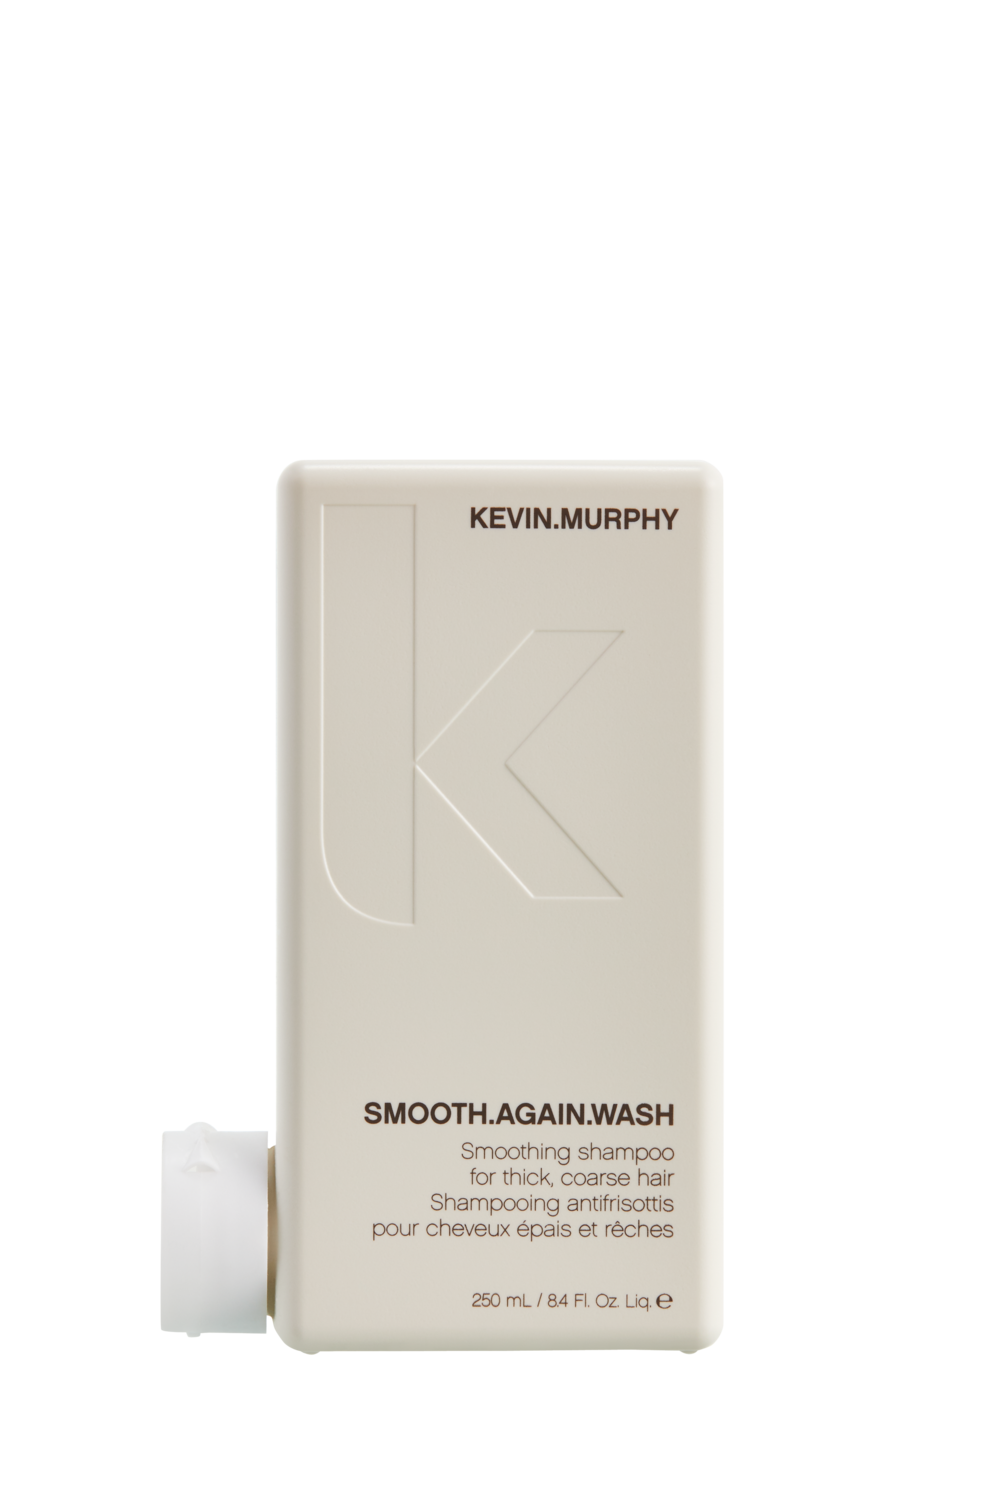 KEVIN.MURPHY SMOOTH.AGAIN.WASH — House of Hair Design